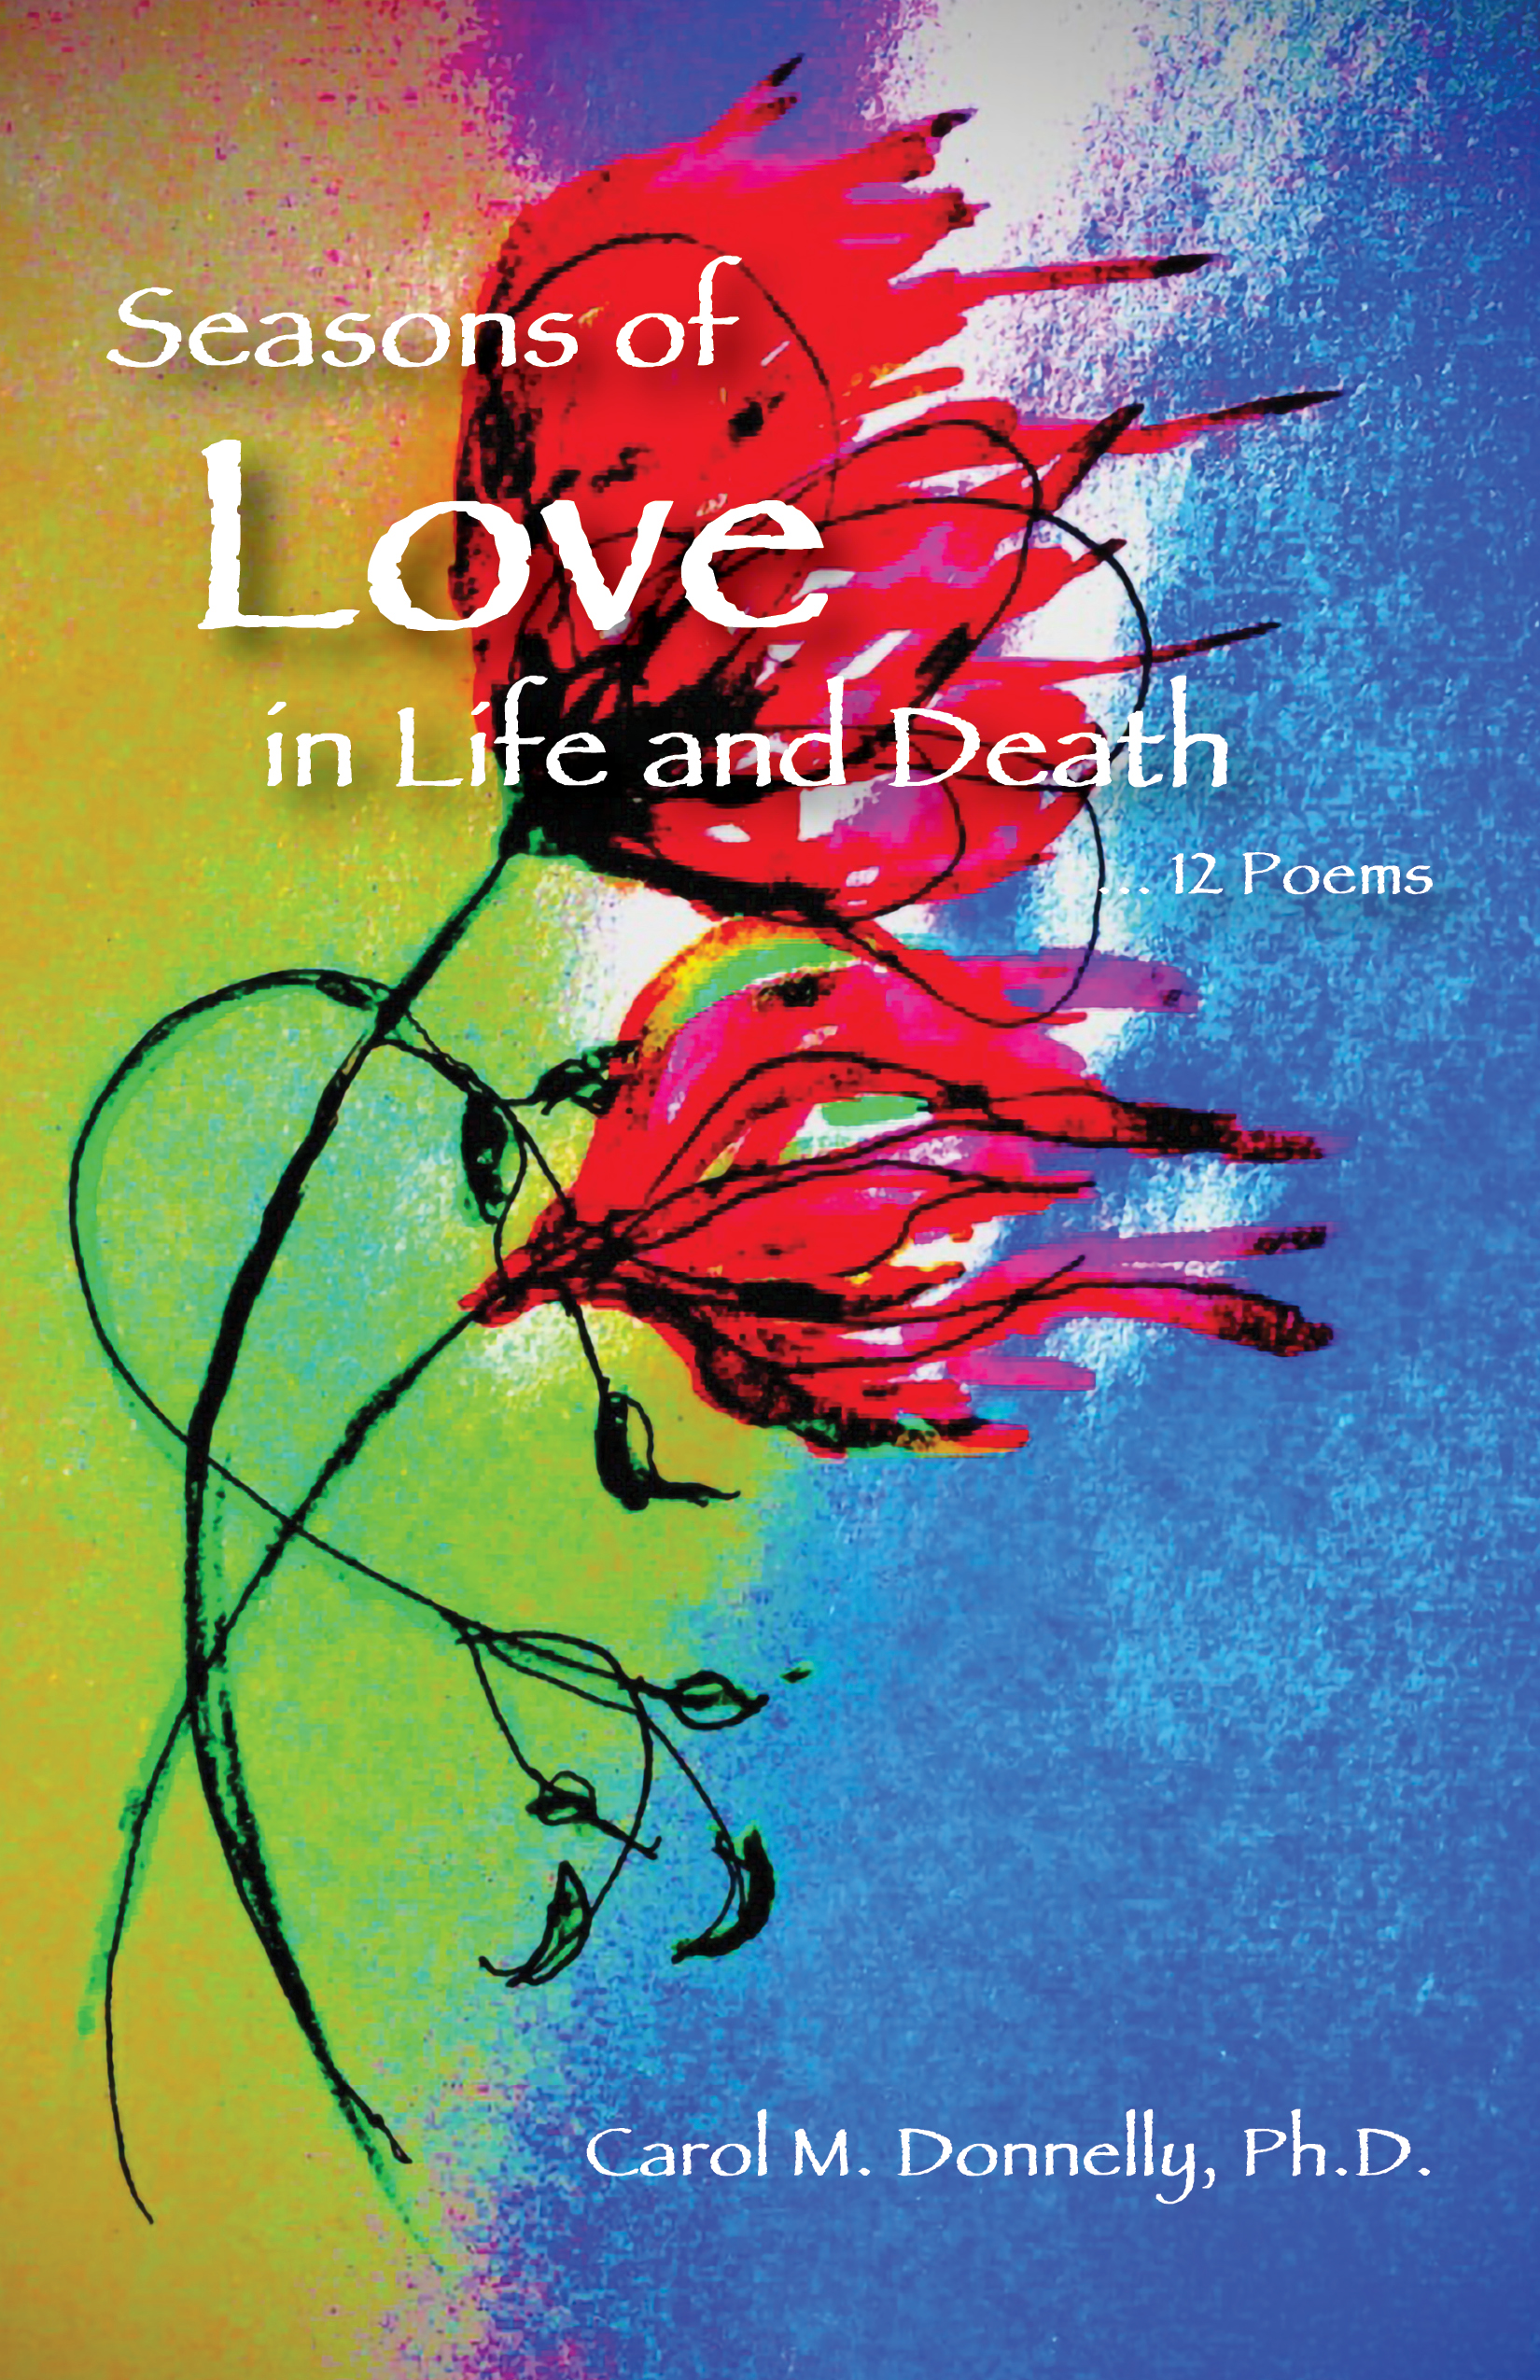 Seasons of Love in Life and Death ... 12 Poems Paperback – January 18, 2023